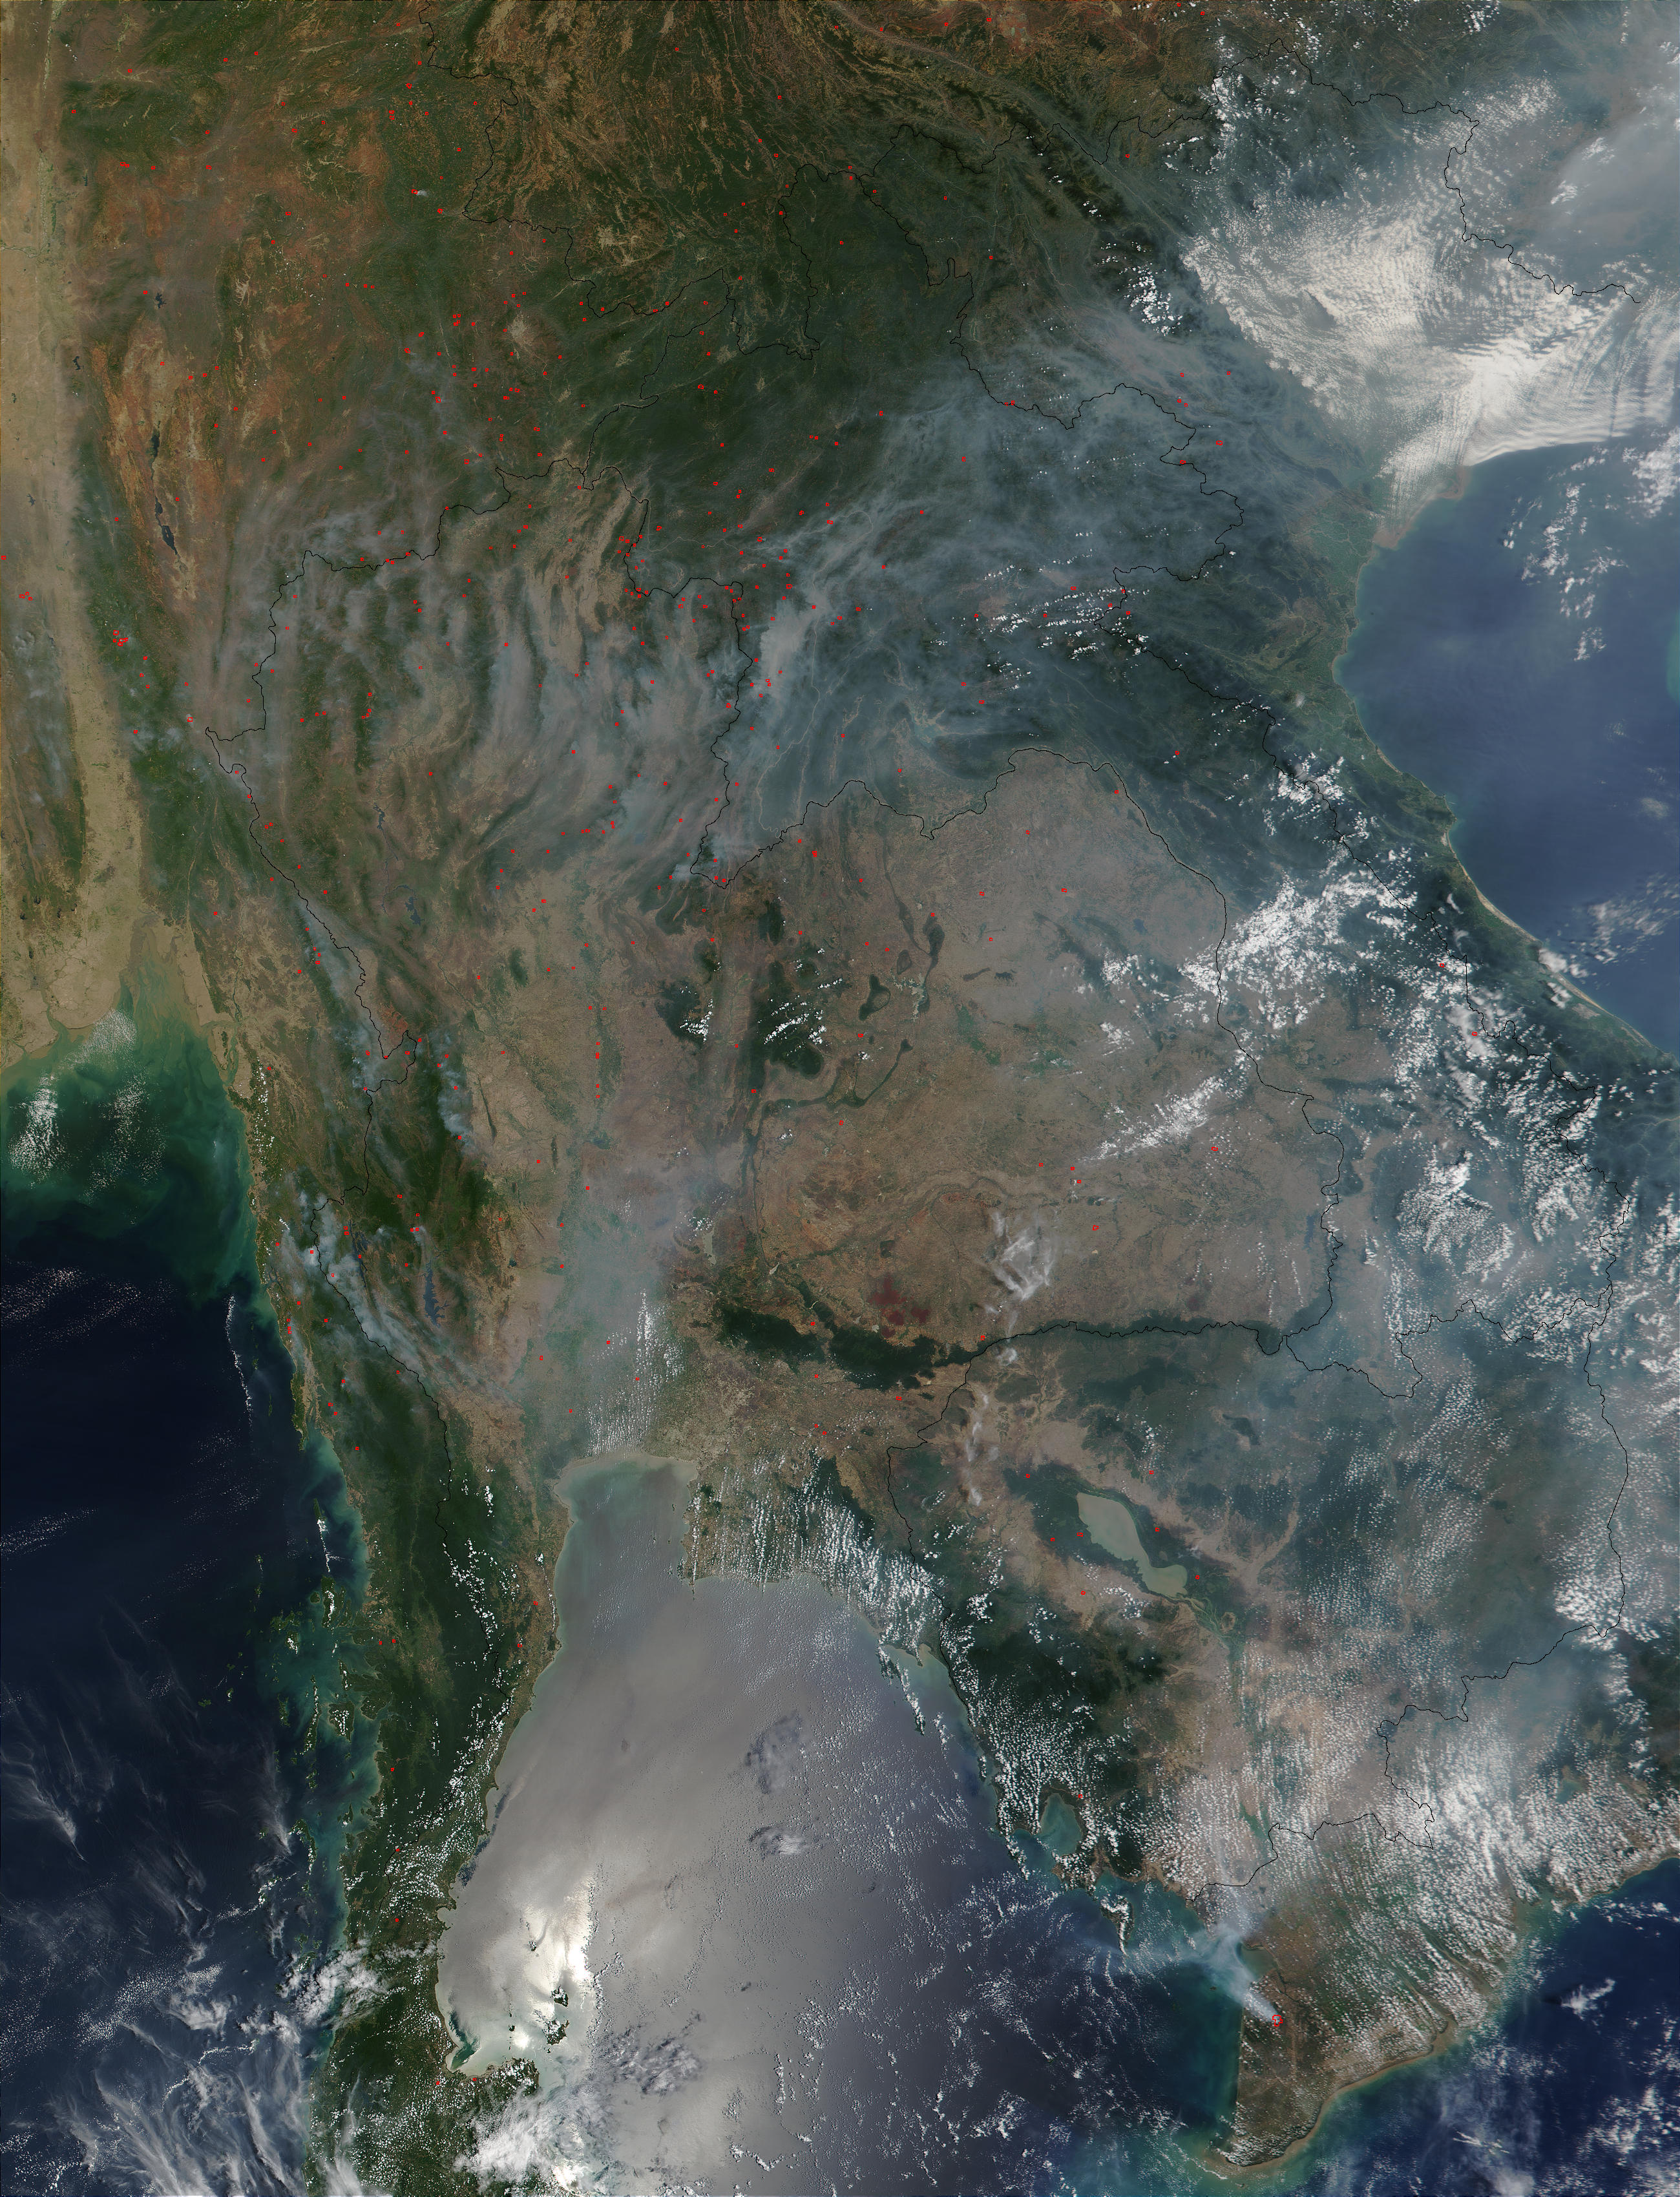 Fires Throughout Thailand, Myanmar, and Laos - related image preview